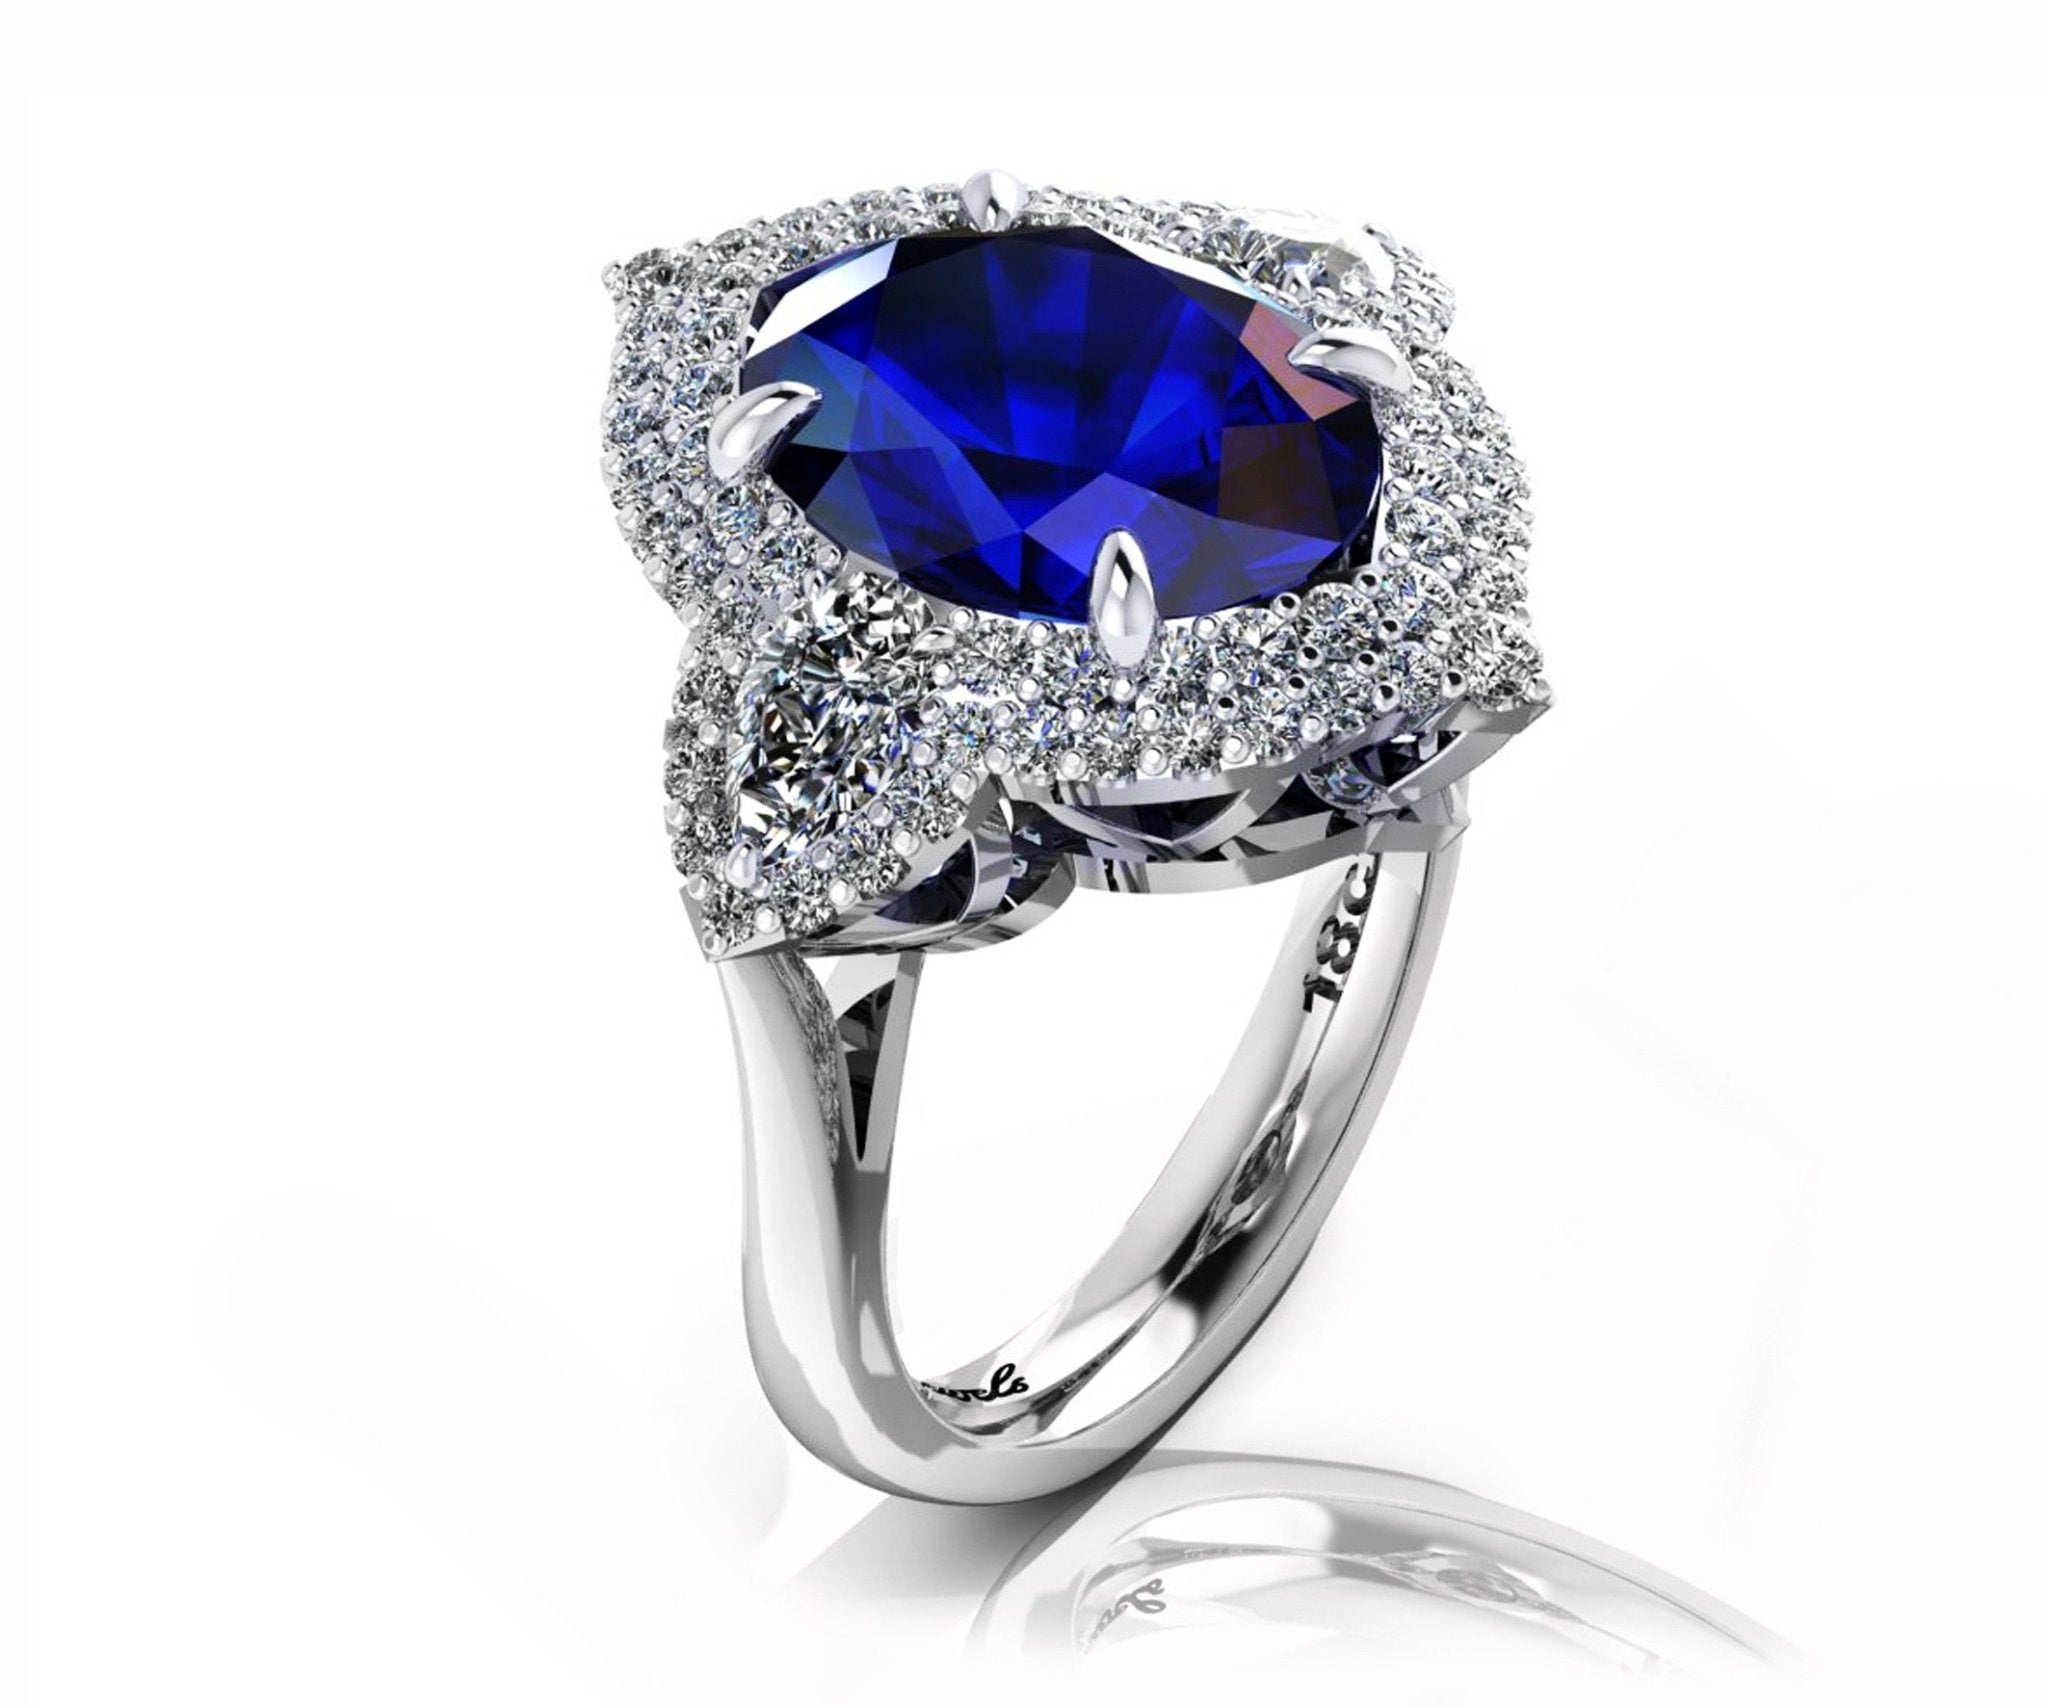 18ct White gold 5ct oval tanzanite dress ring with pave diamonds - ForeverJewels Design Studio 8